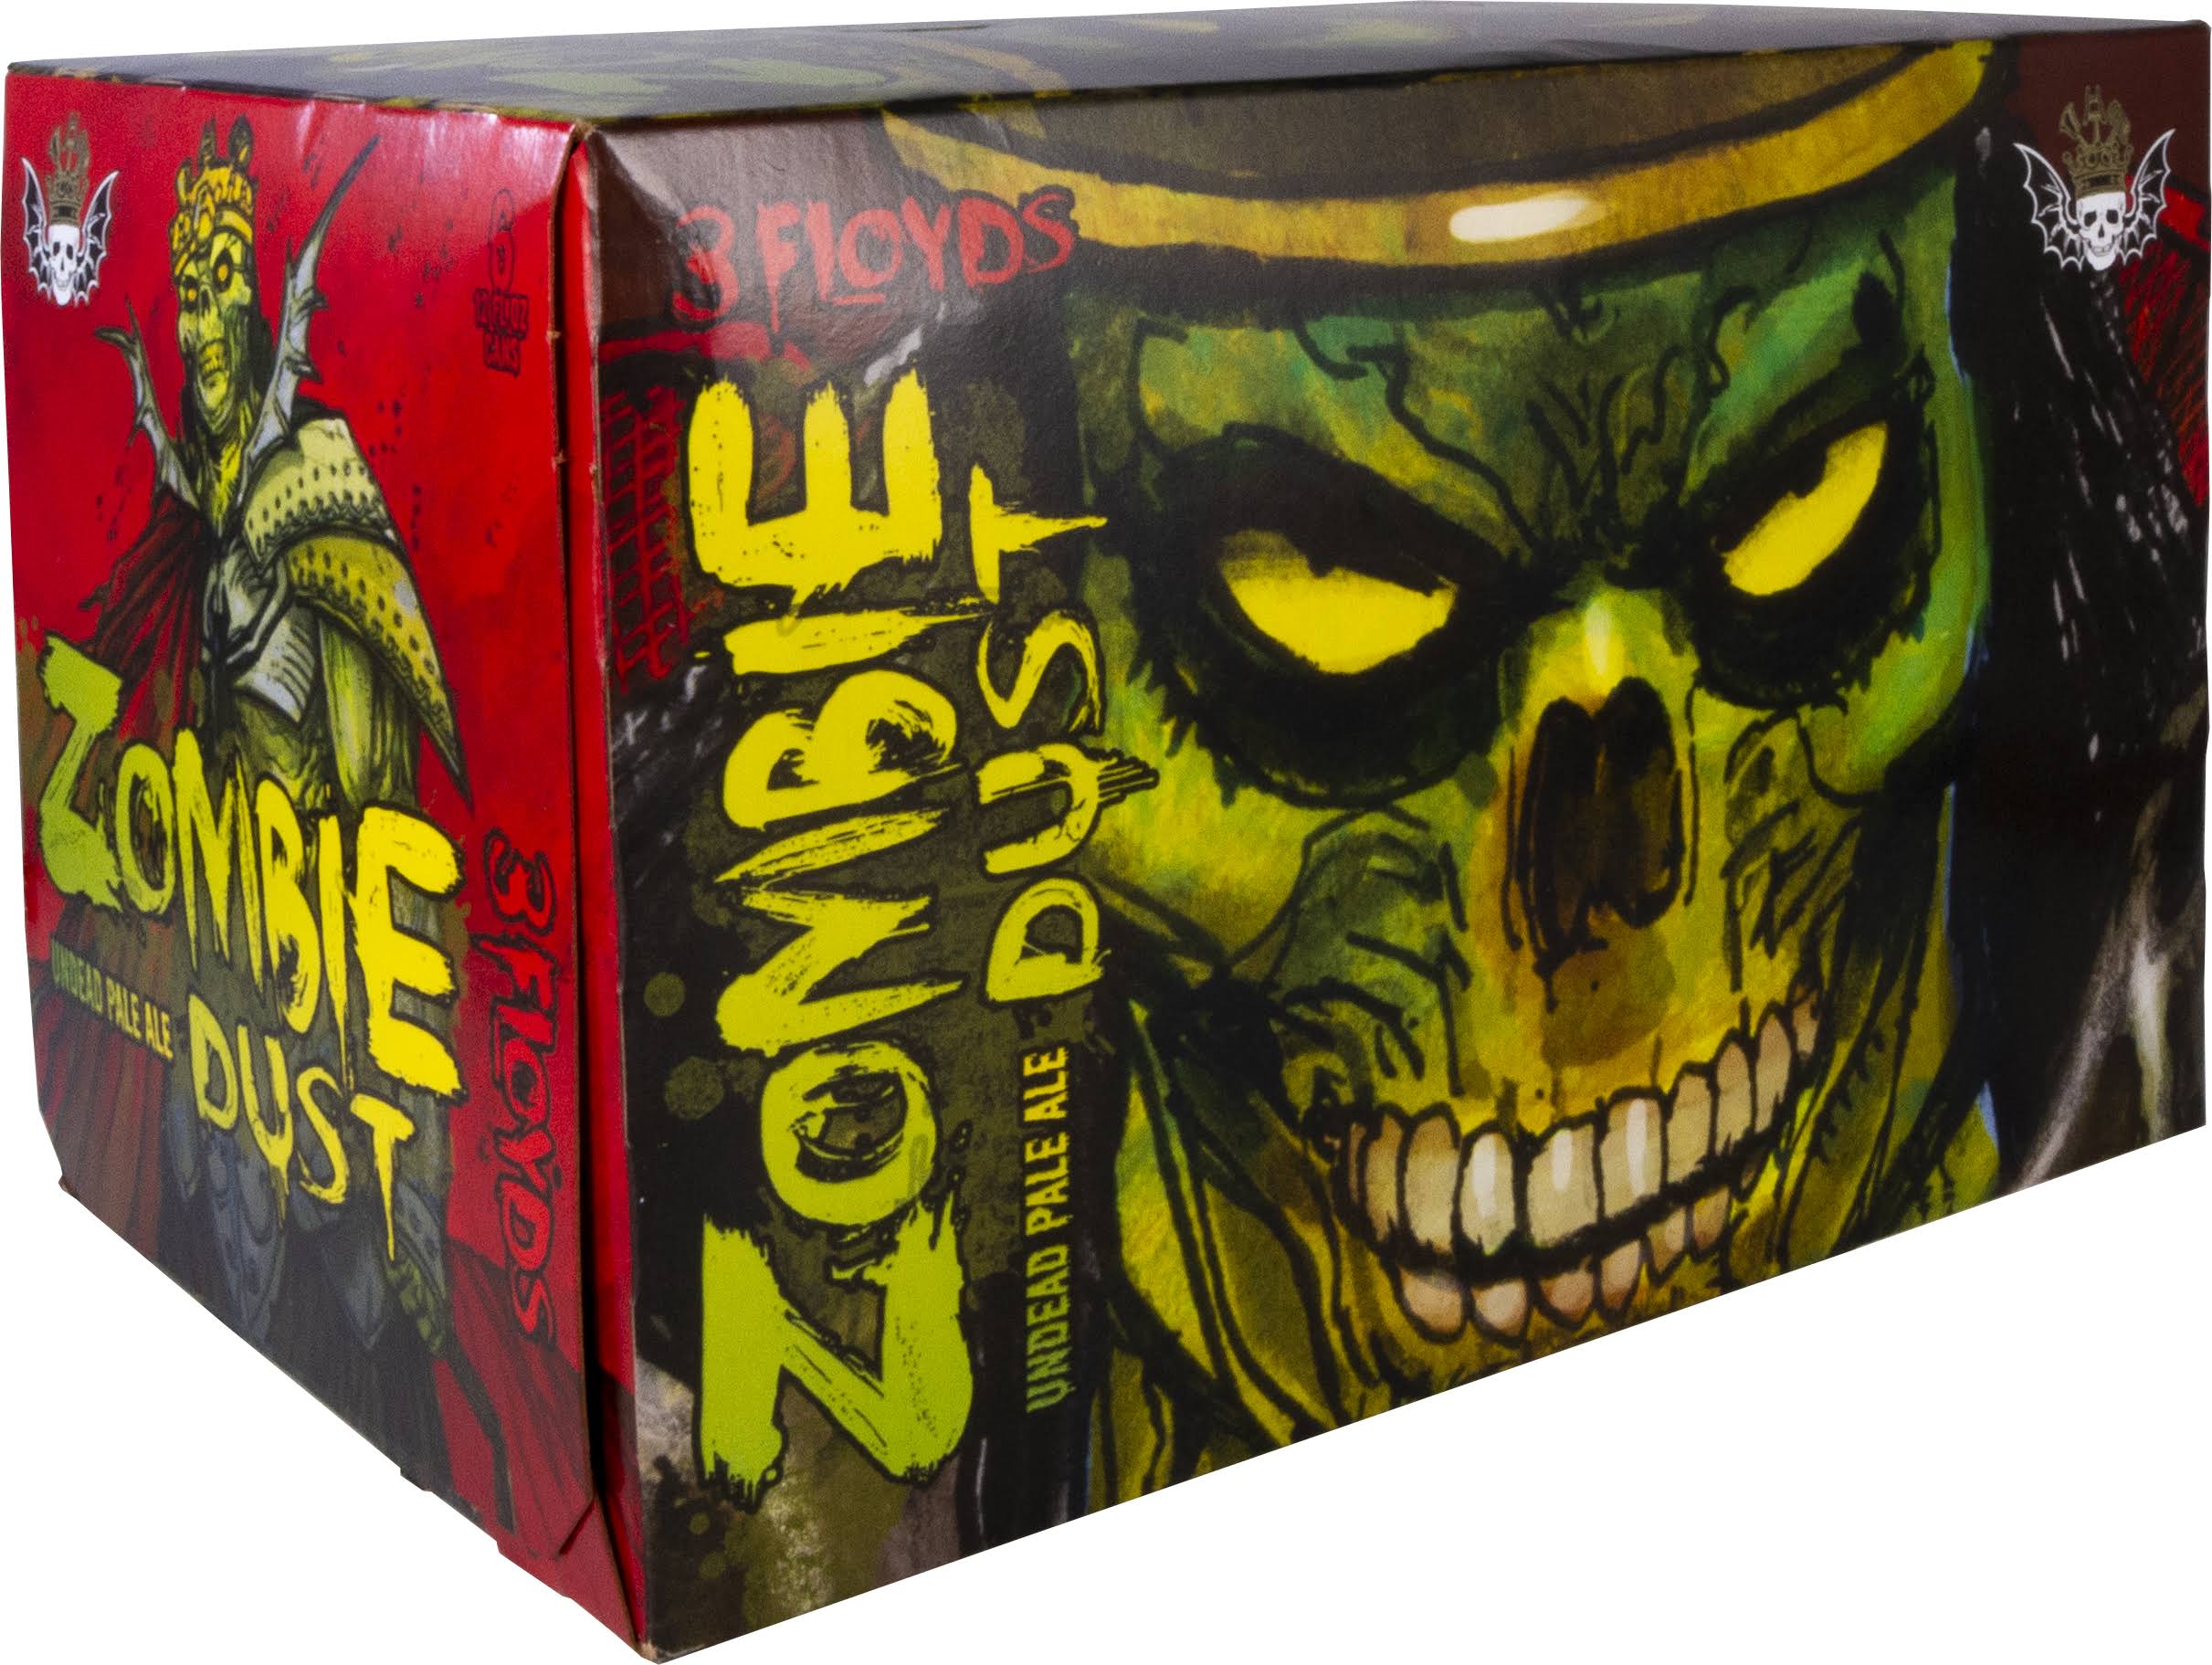 3 Floyds Beer, Undead Pale Ale, Zombie Dust, 6 Pack - 6 pack, 12 fl oz cans